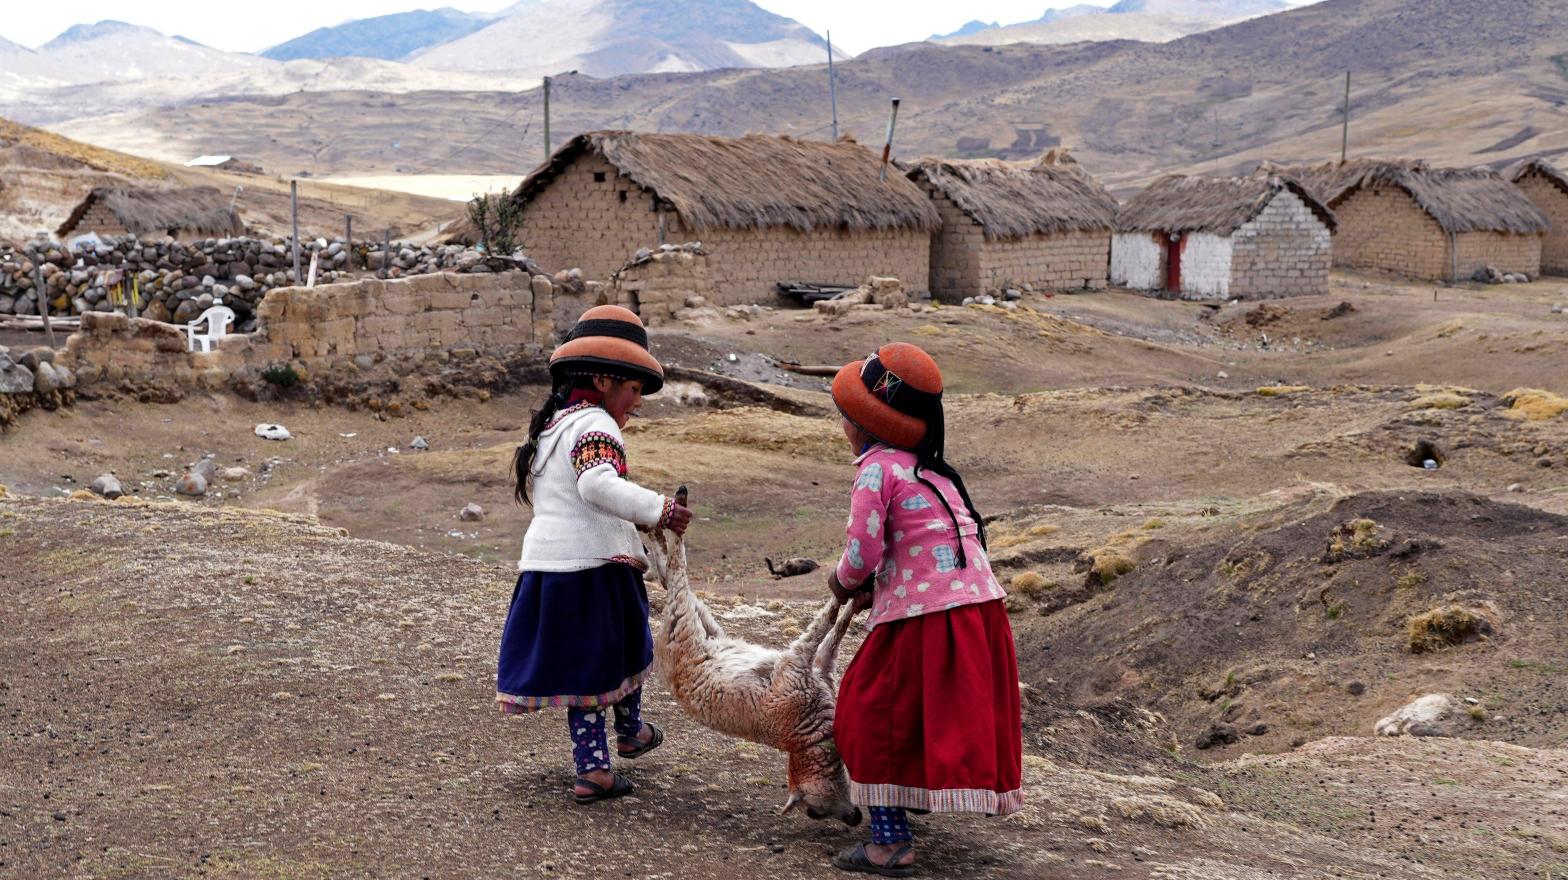 Girls carry the body of a dying sheep in the community near the Cconchaccota lagoon in the Apurimac region of Peru. (Photo: Guadalupe Pardo, AP)